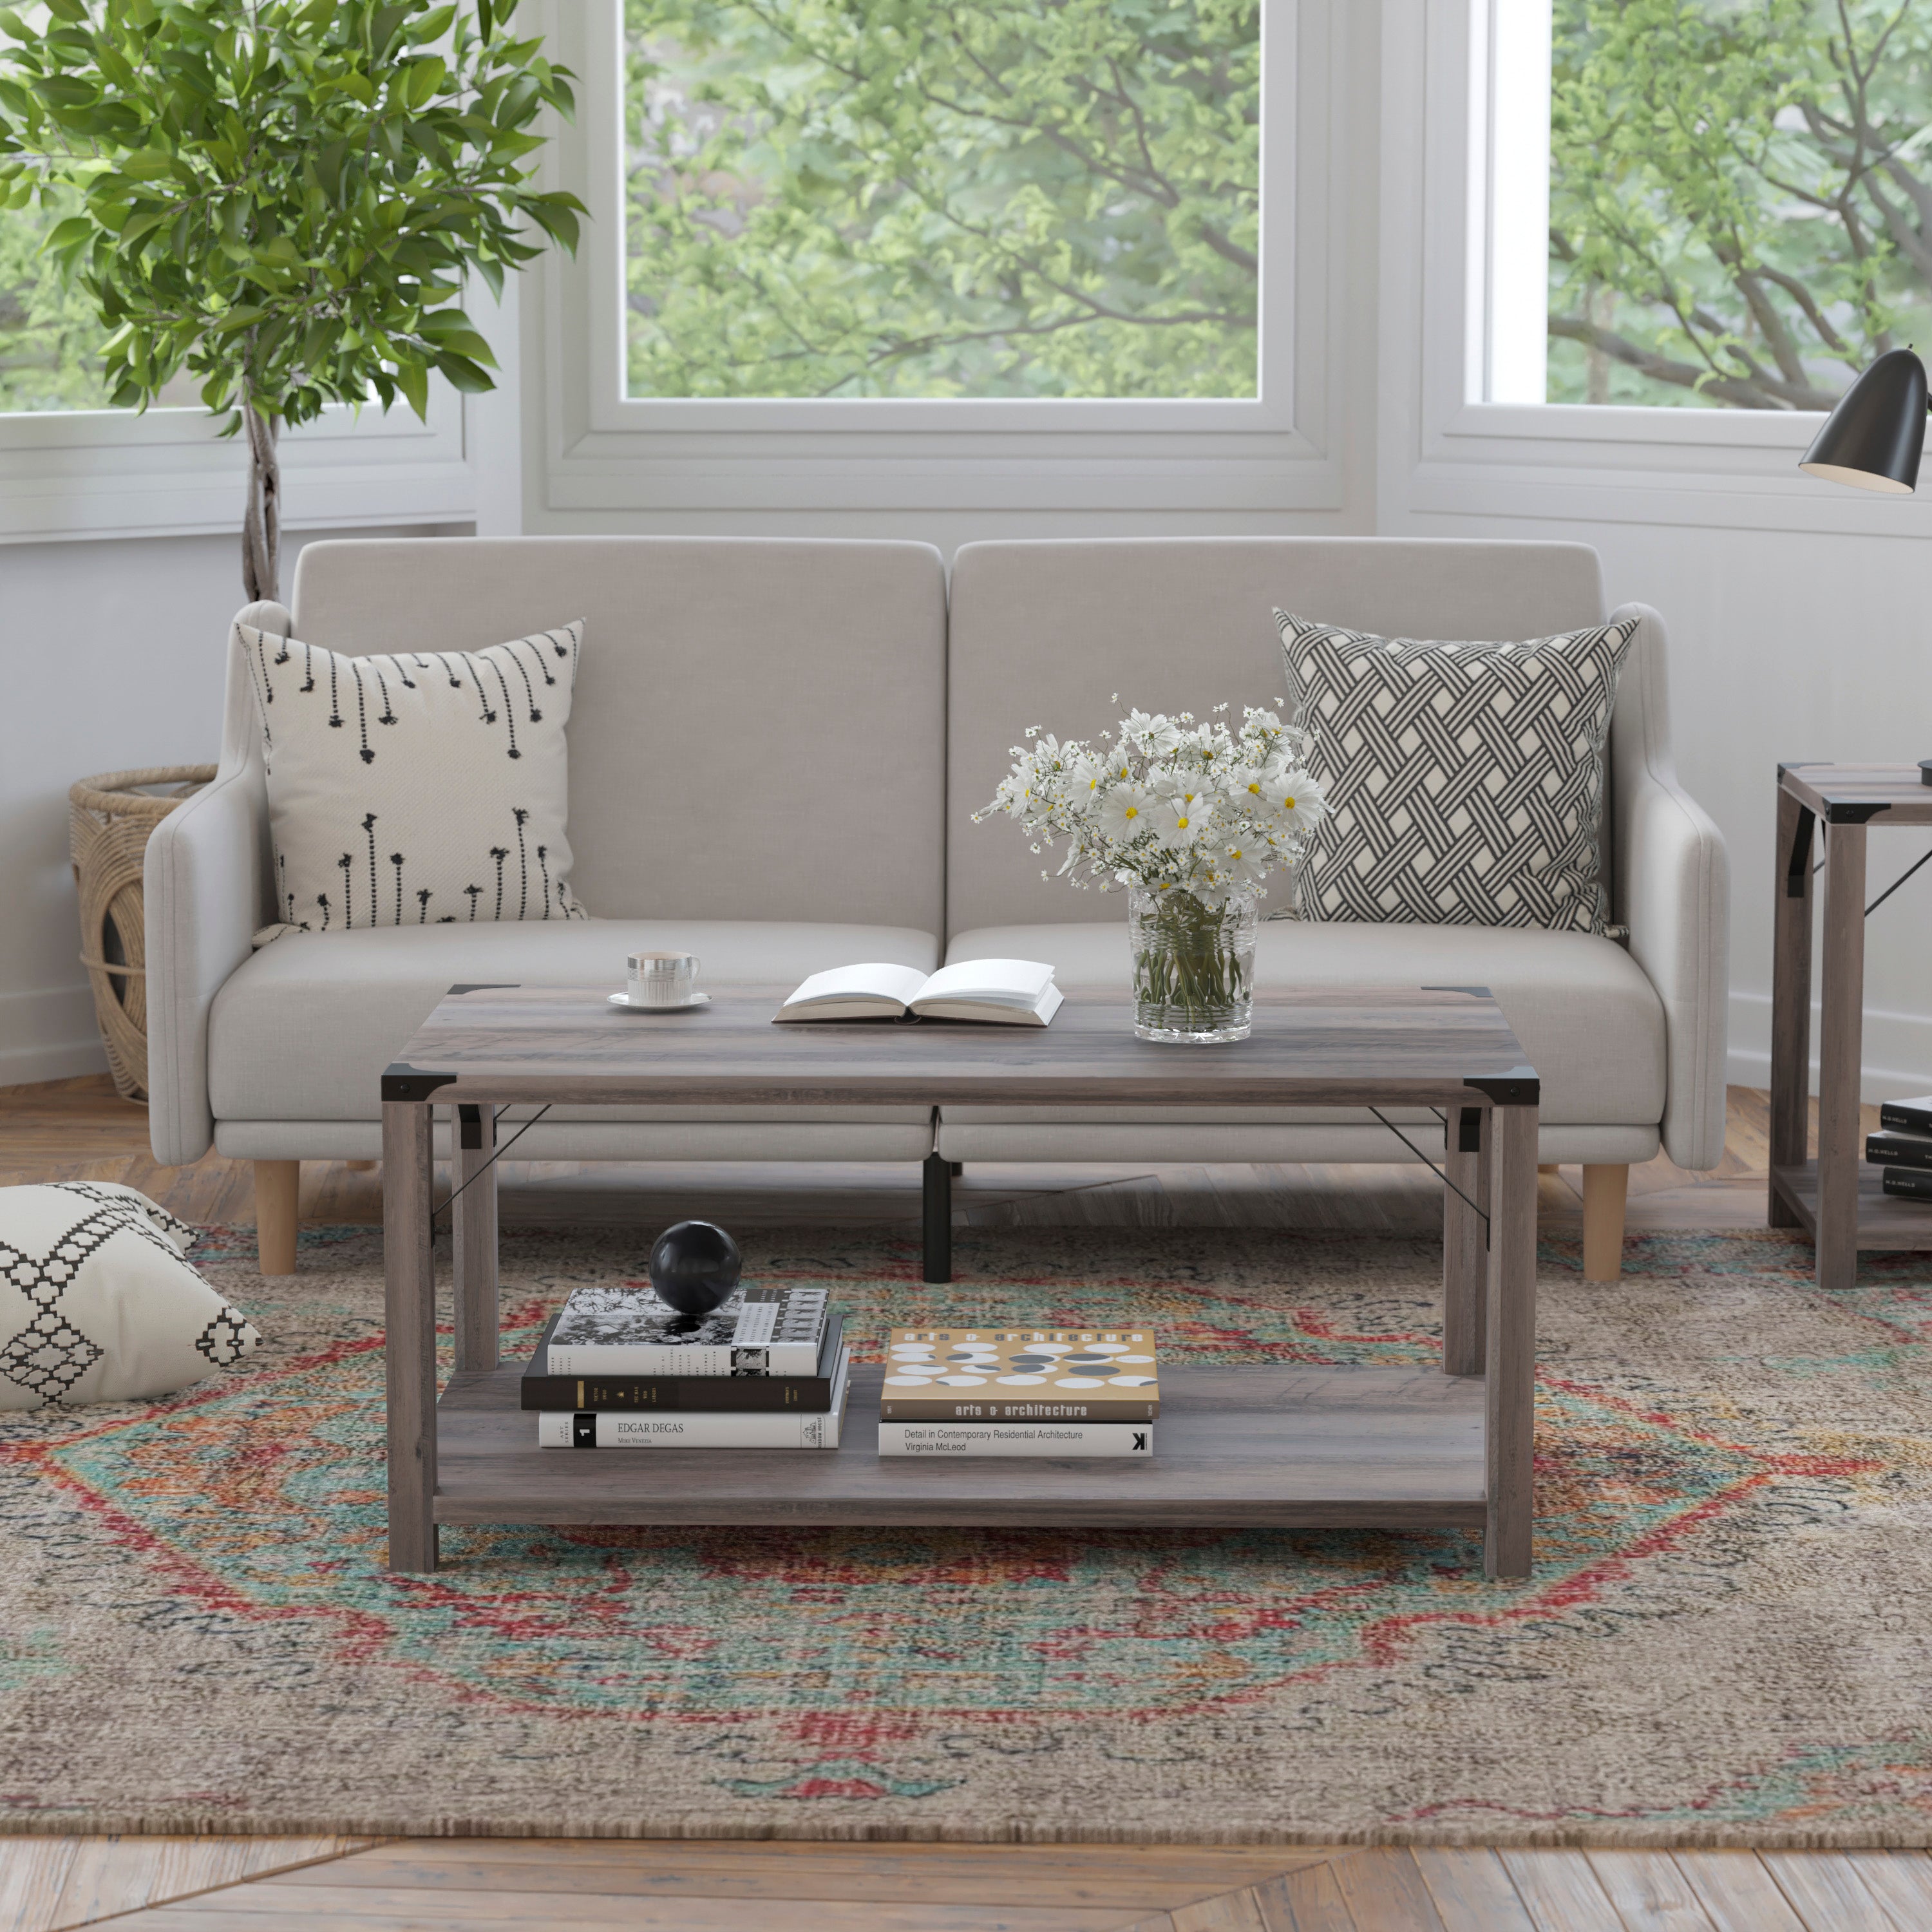 Wyatt Modern Farmhouse Wooden 2 Tier Coffee Table with Metal Corner Accents and Cross Bracing-Coffee Table-Flash Furniture-Wall2Wall Furnishings